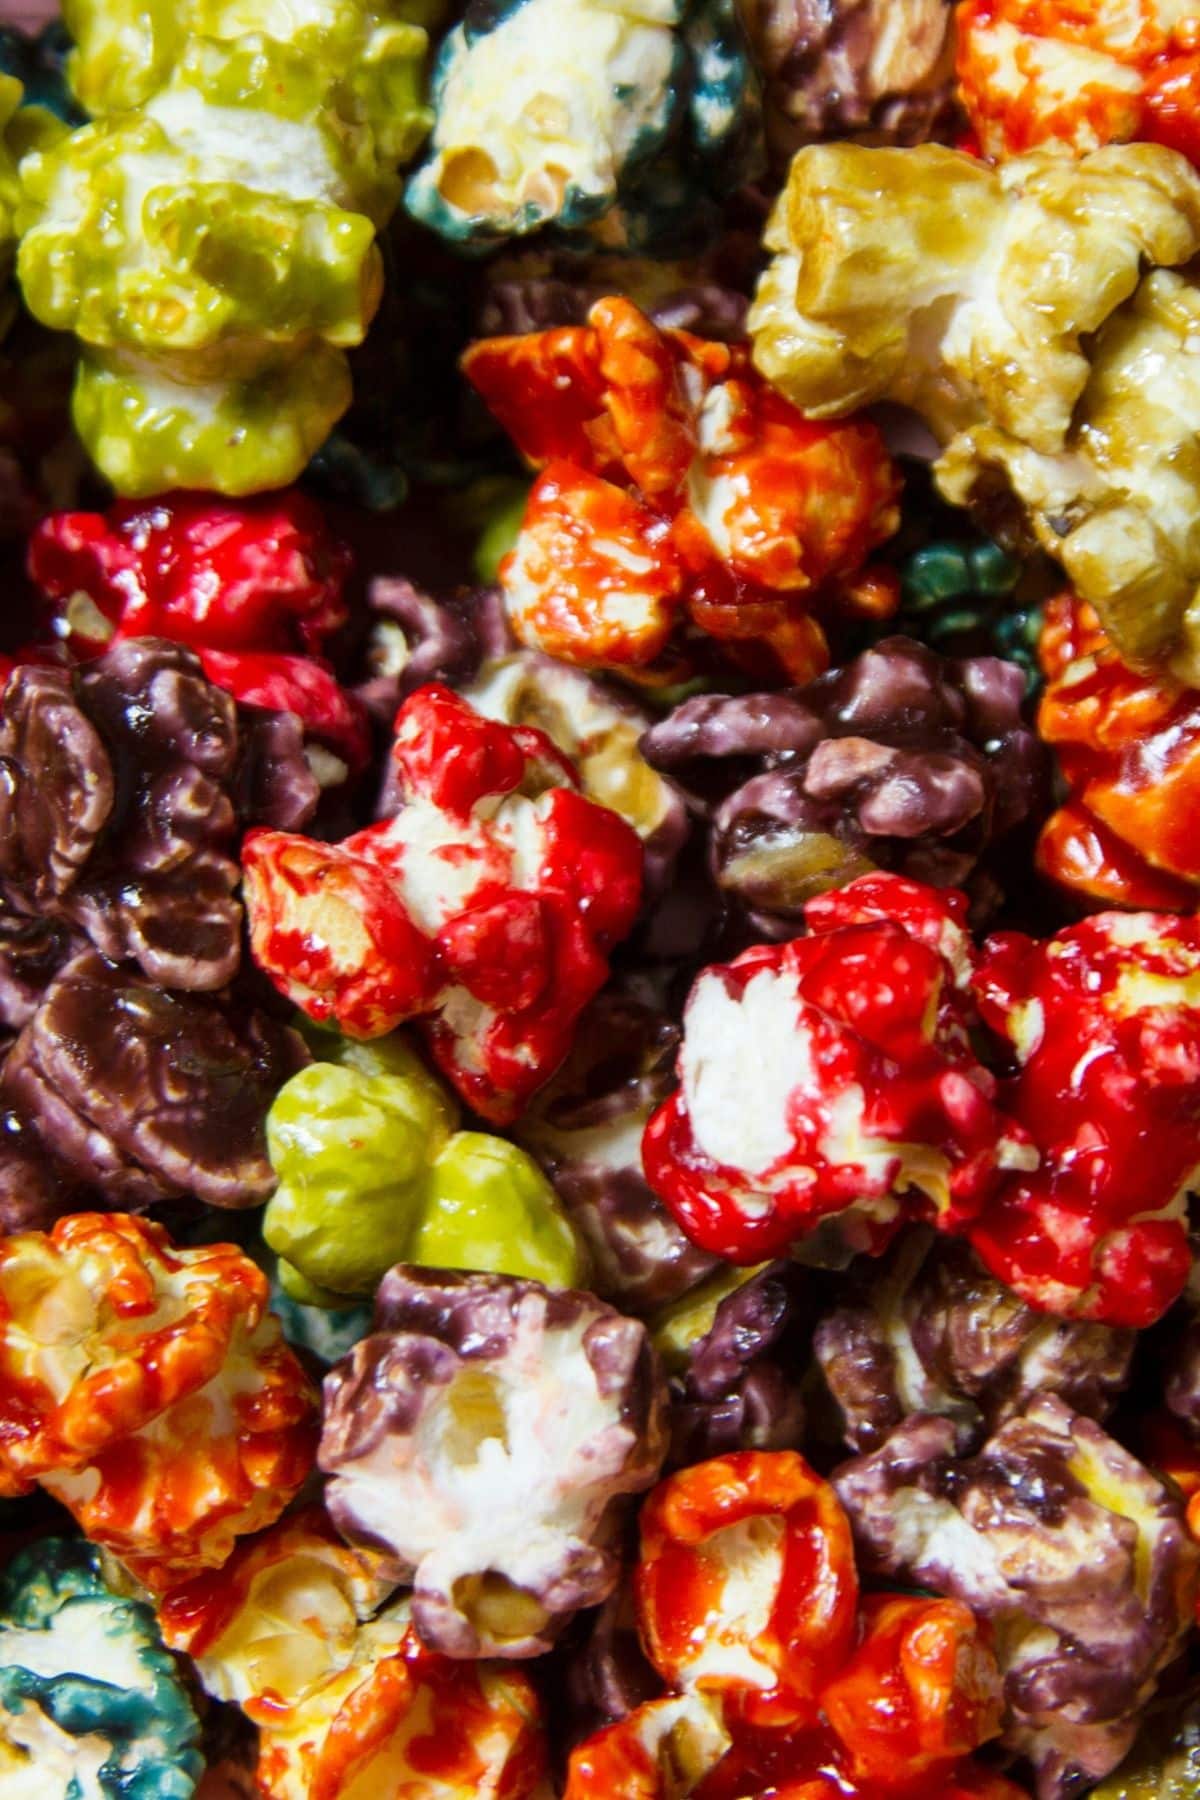 popcorn in various colors.